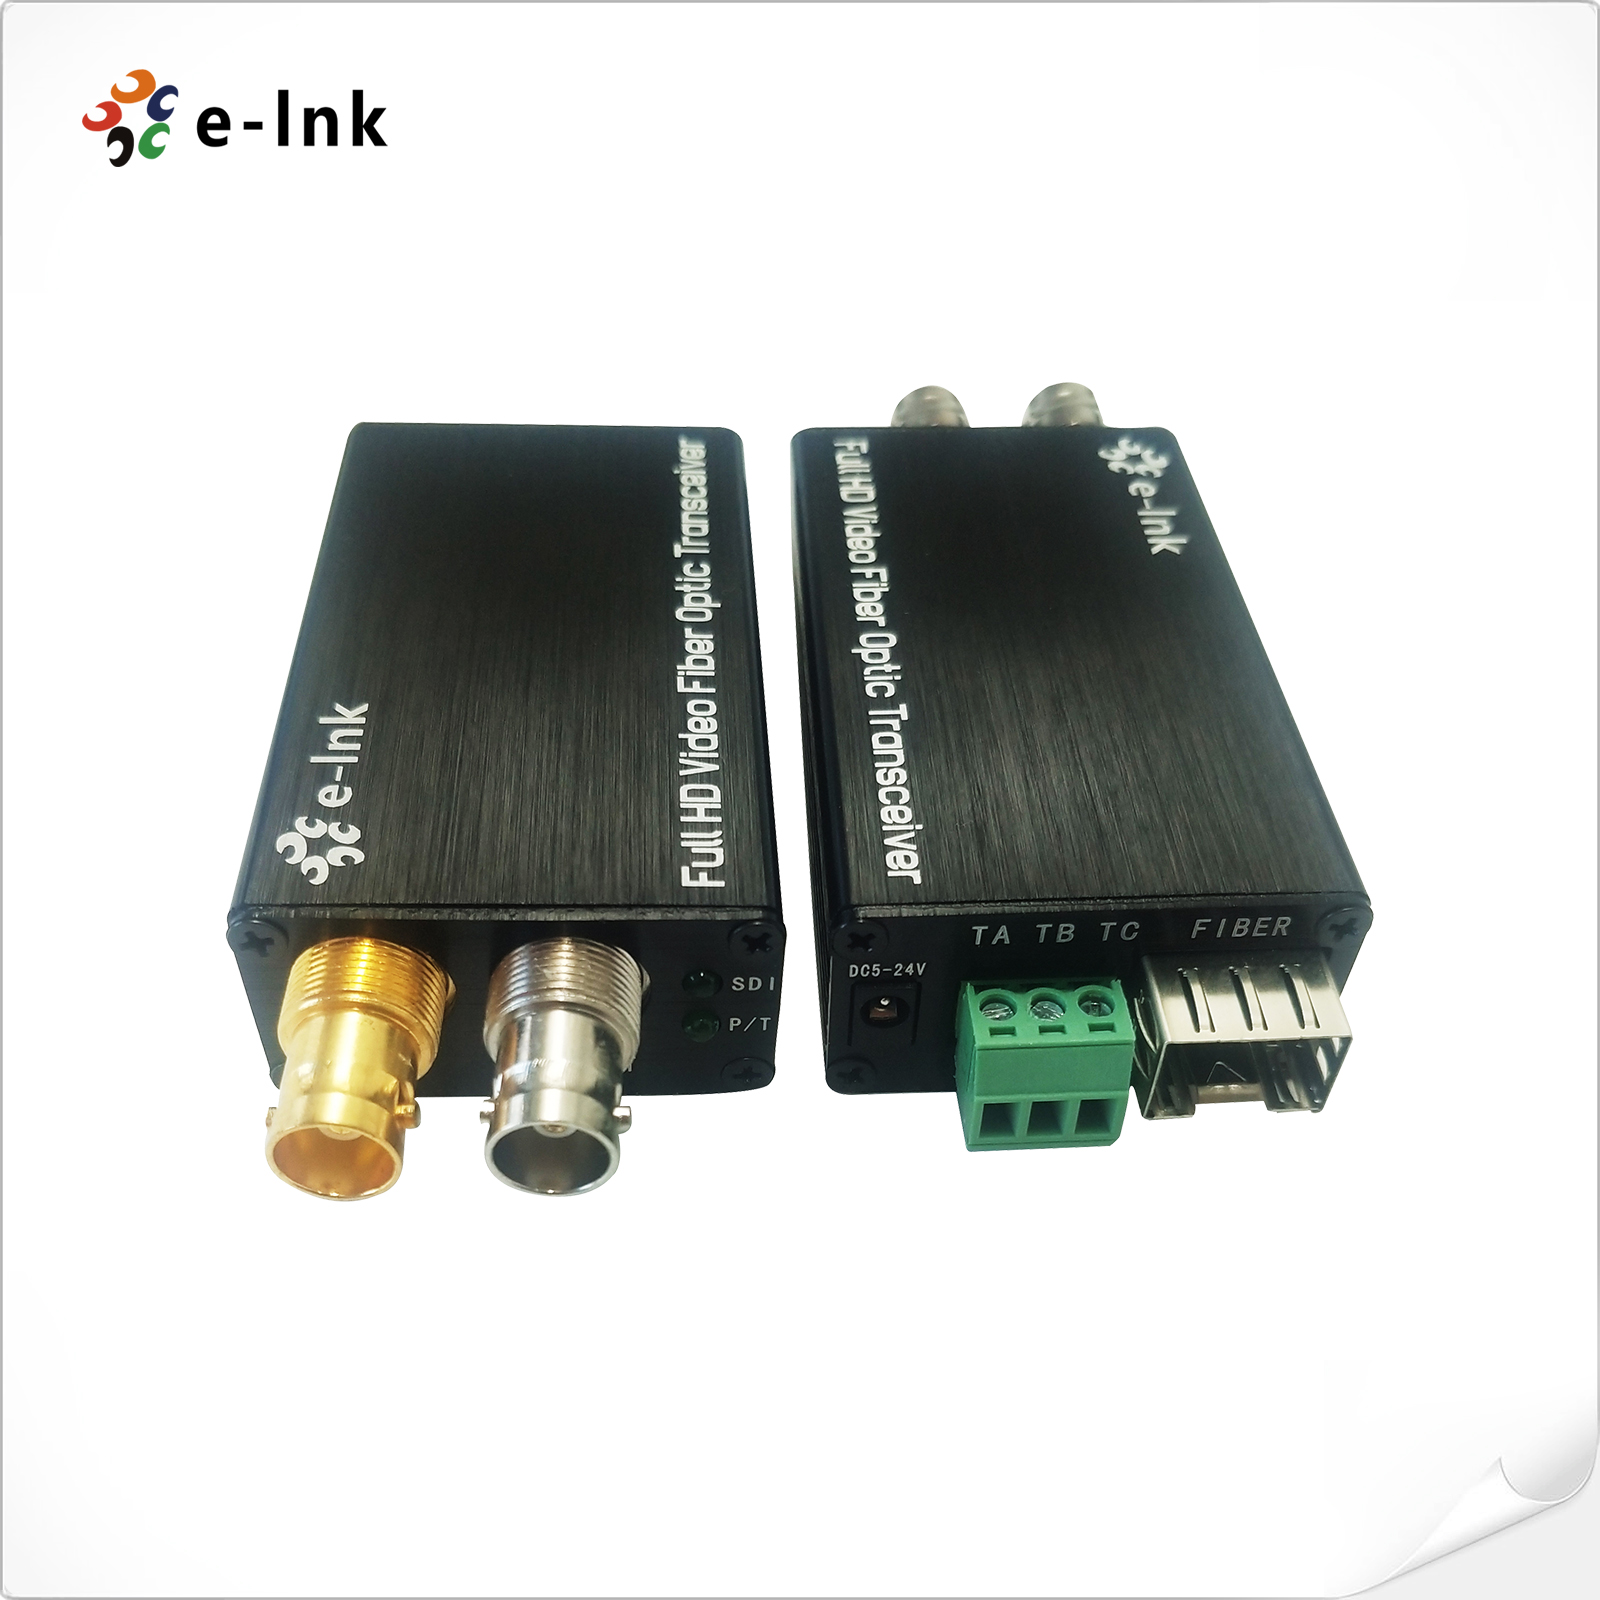 Mini-type 3G-SDI to Fiber Converter with Tally or Reverse RS485